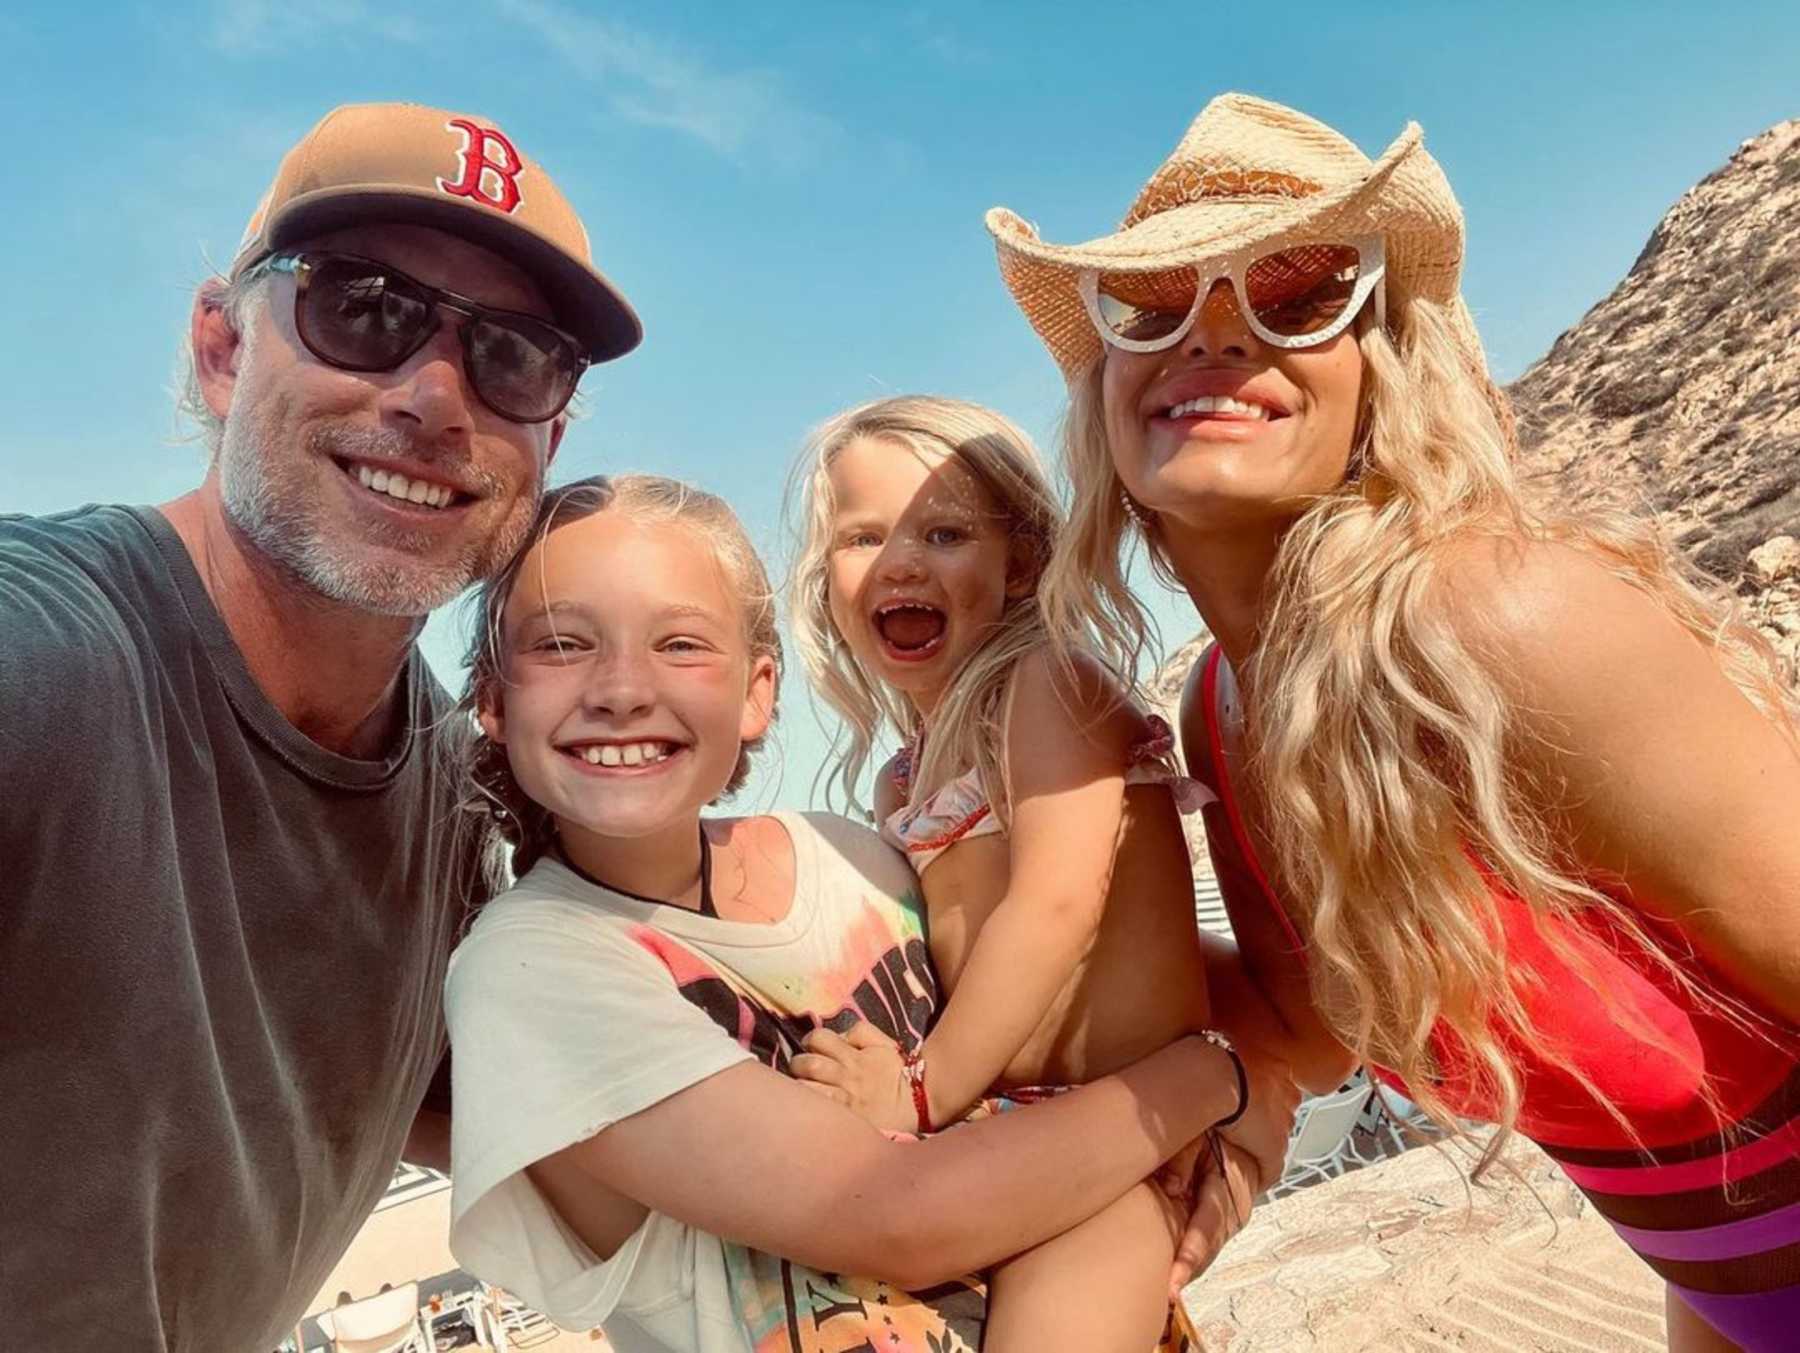 Jessica Simpson Let Daughter, 3, Use Pacifier, Not Wear Life Jacket